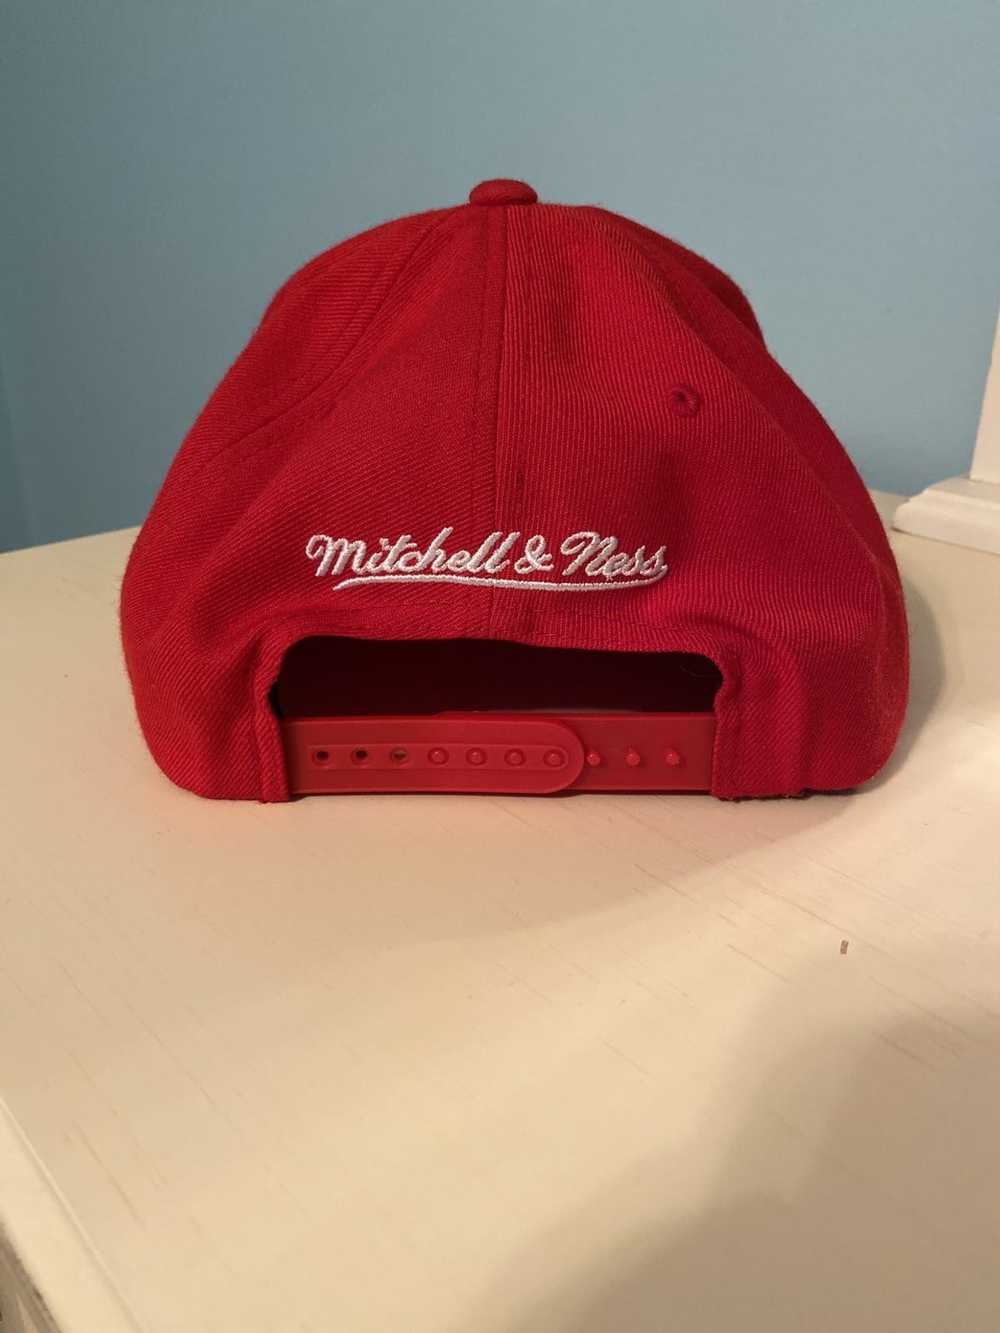 Mitchell & Ness Red Bull’s Adjustable Hat - image 2